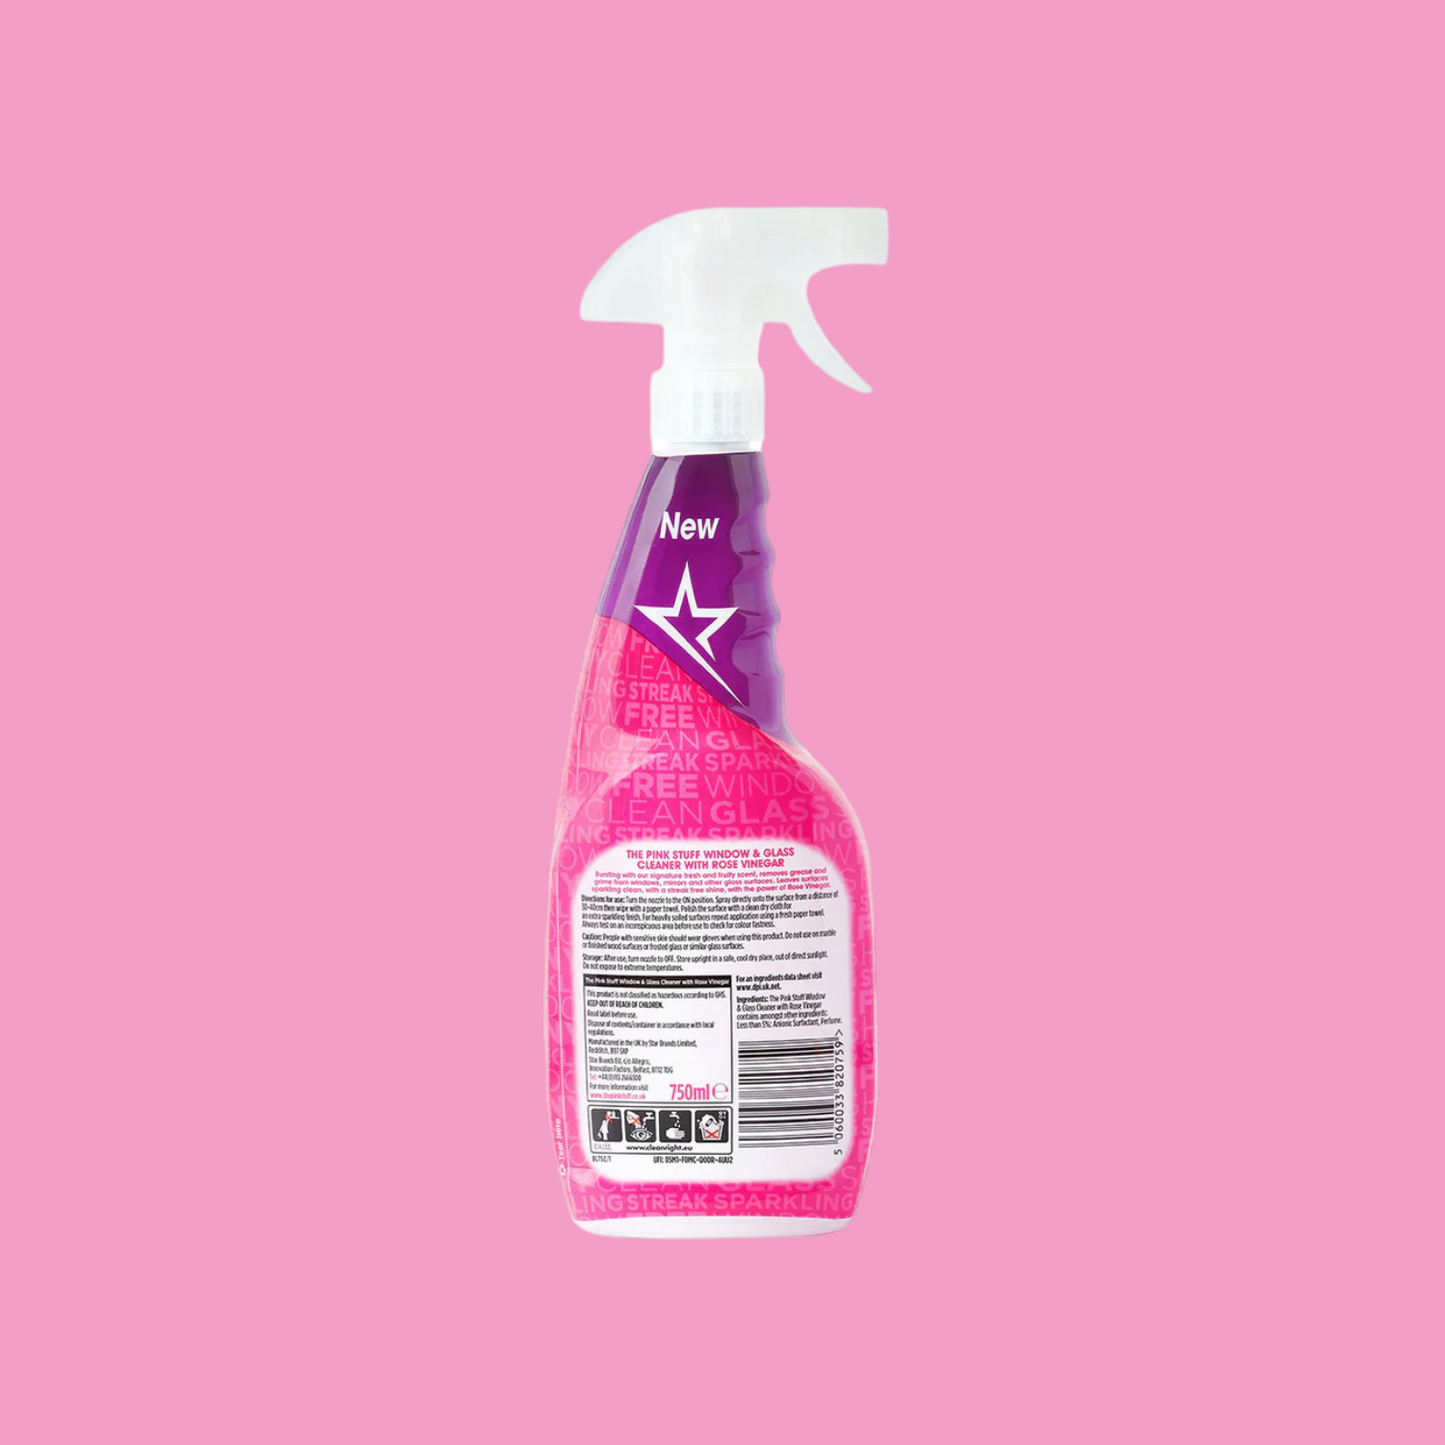 The Pink Stuff Window Cleaner with Rose Vinegar 850ml